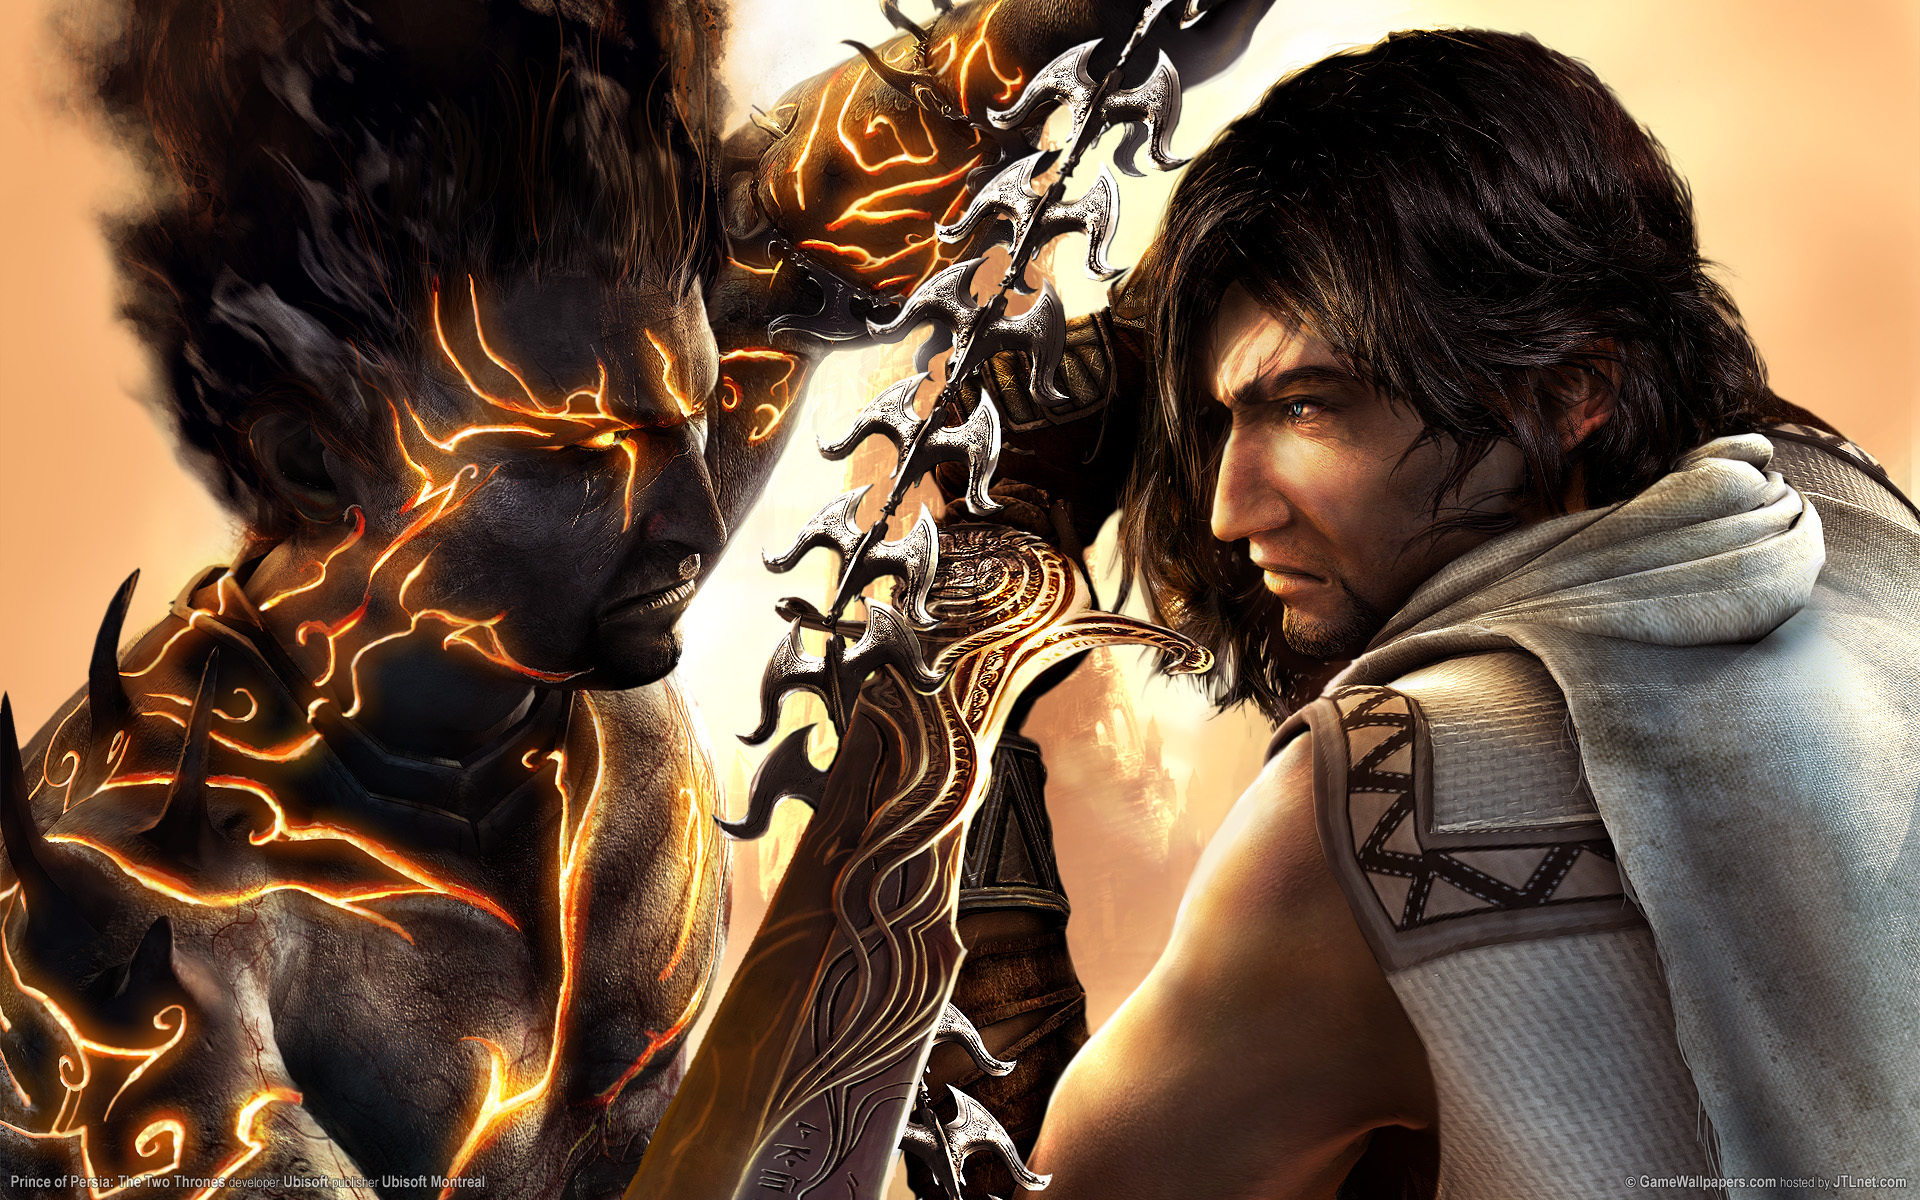 6407 download wallpaper games, prince of persia screensavers and pictures for free